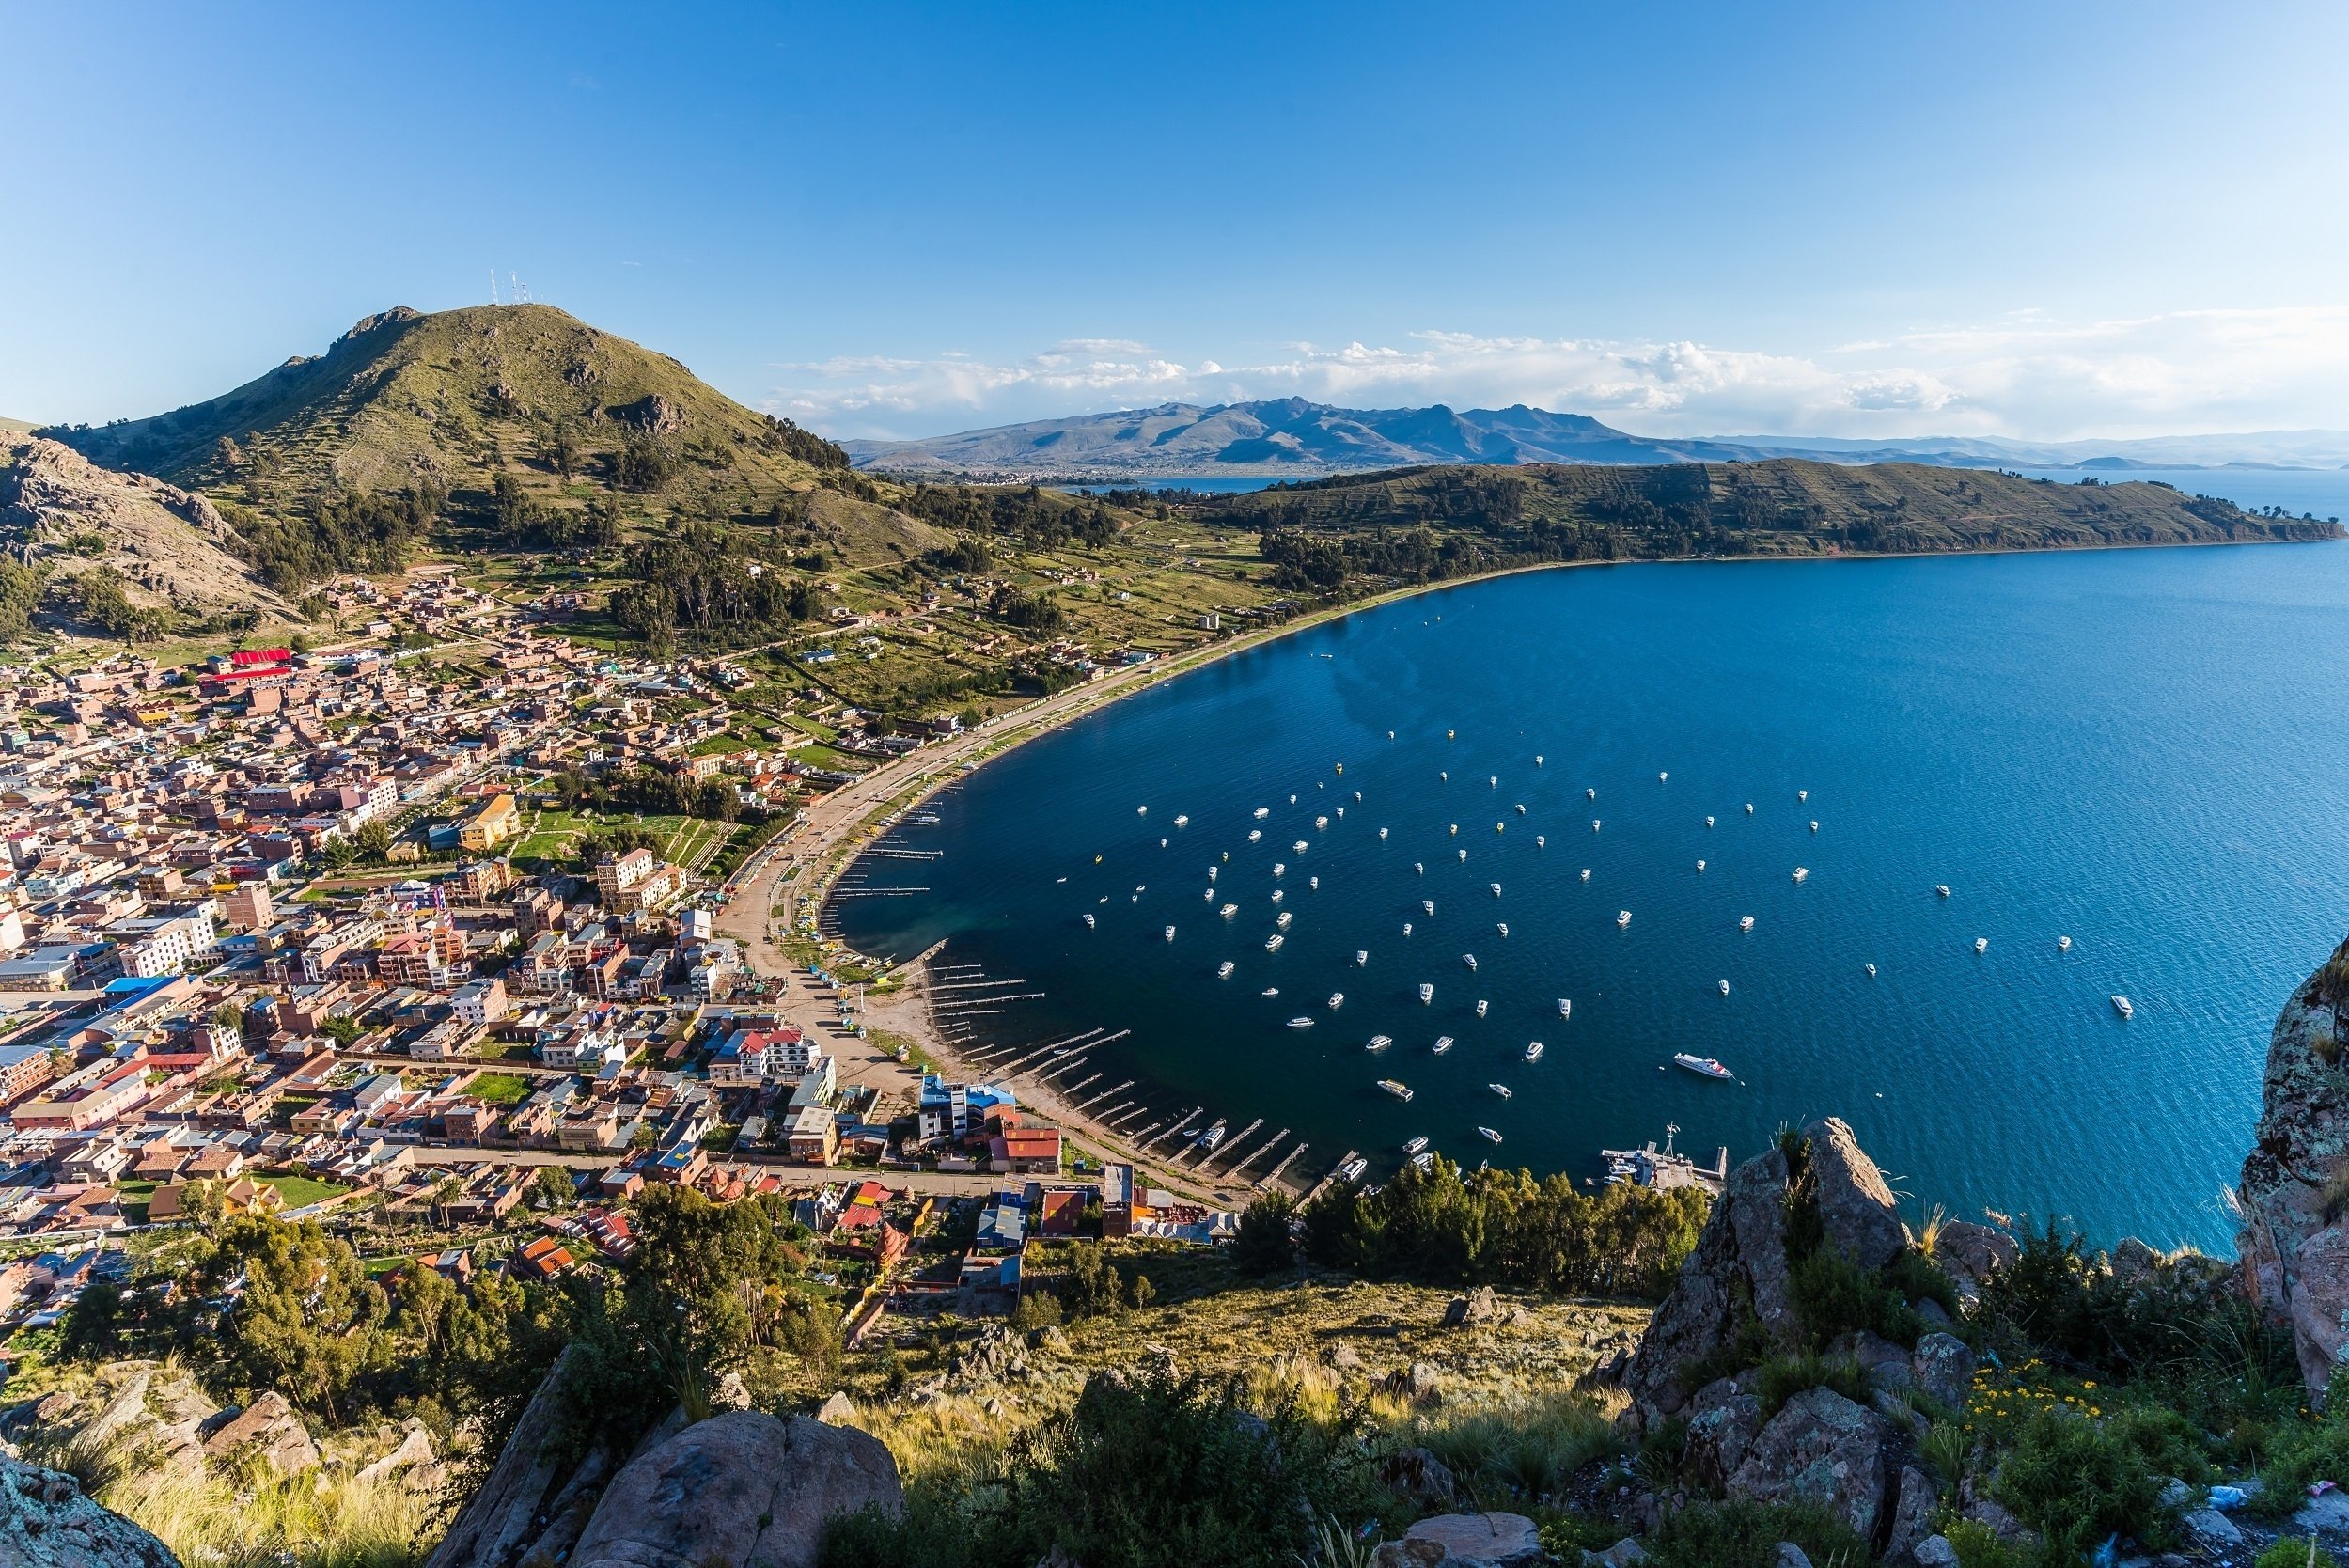 Lake Titicaca is a large, deep freshwater lake in the Andes Mountains on the border of Bolivia and Peru. (Shutterstock) 